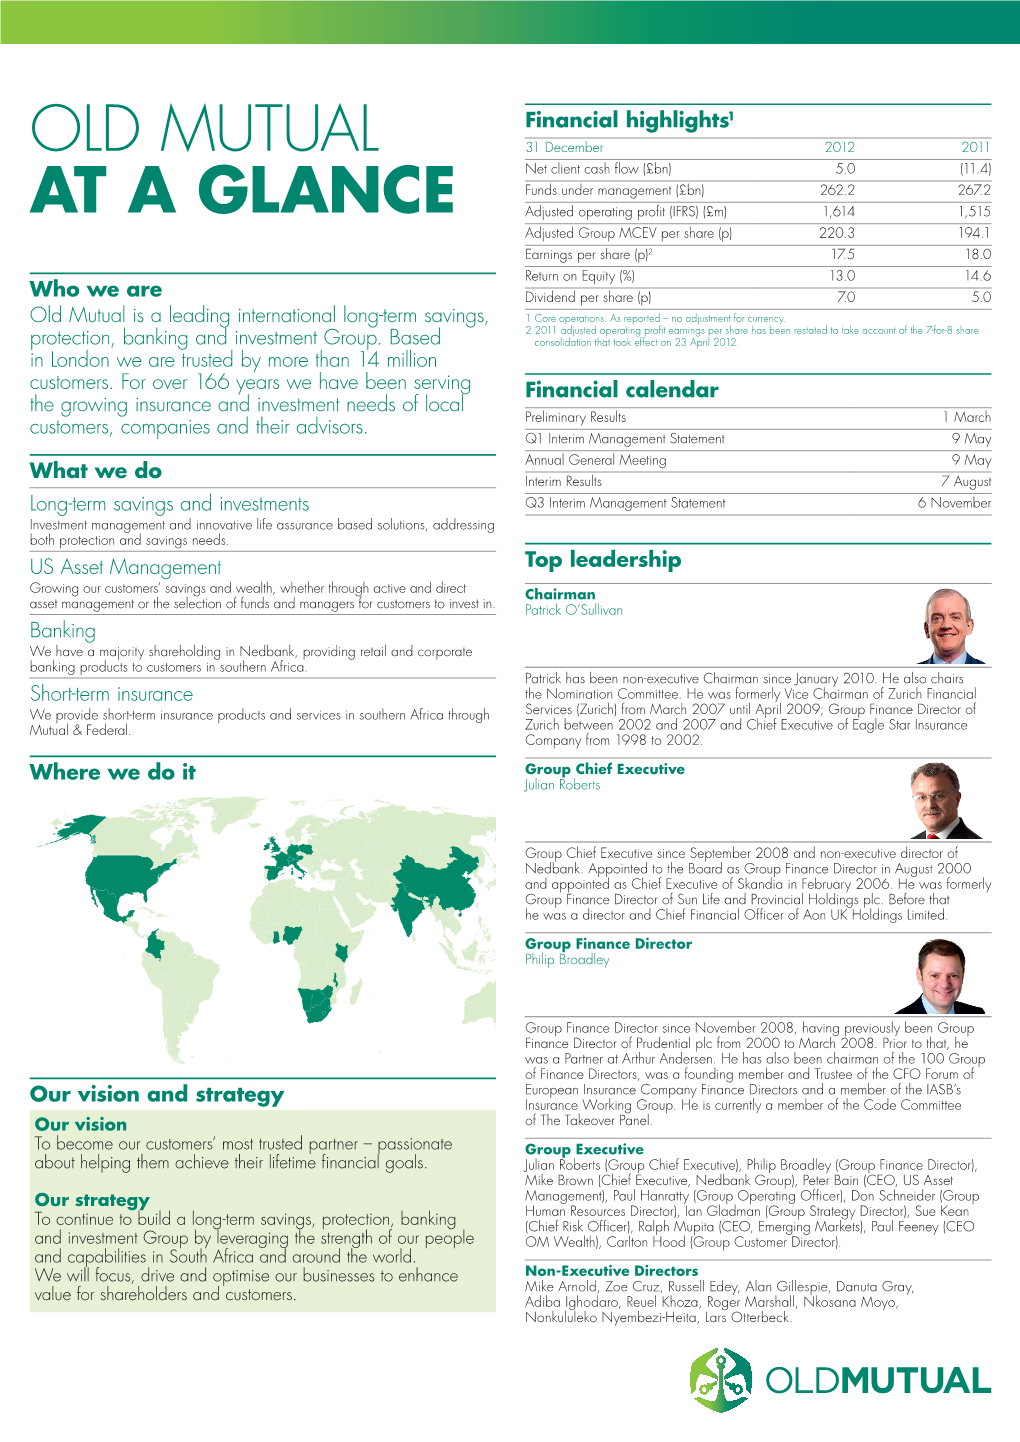 Old Mutual at a Glance